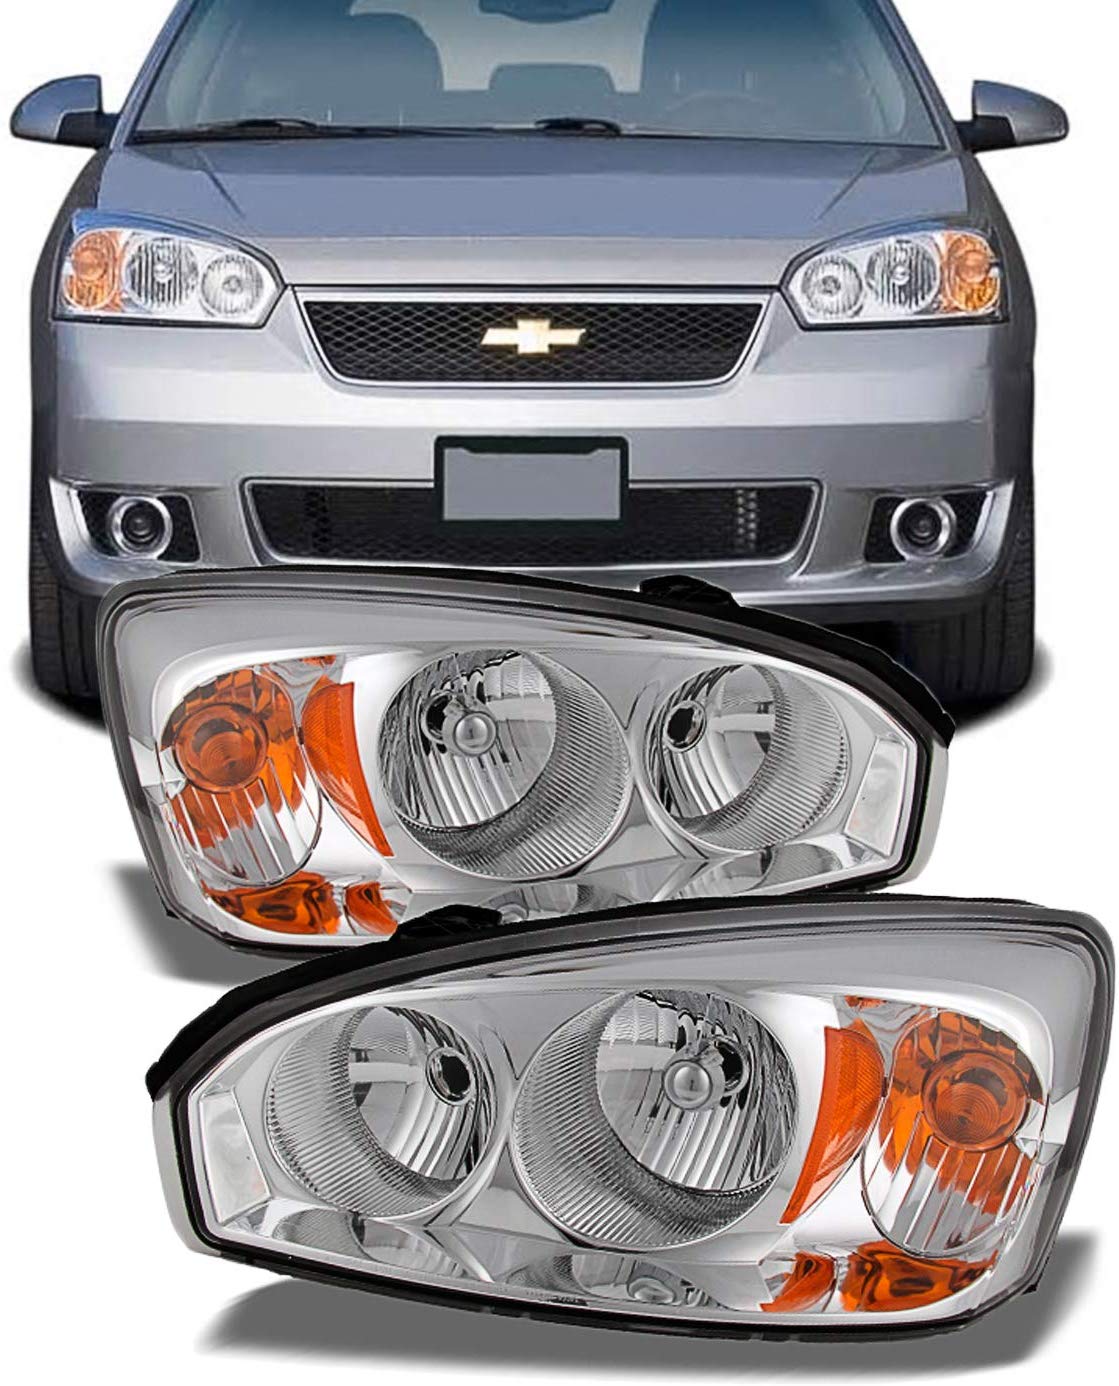 For Chevy Malibu OE Replacement Chrome Bezel Headlights Driver/Passenger Head Lamps Pair New